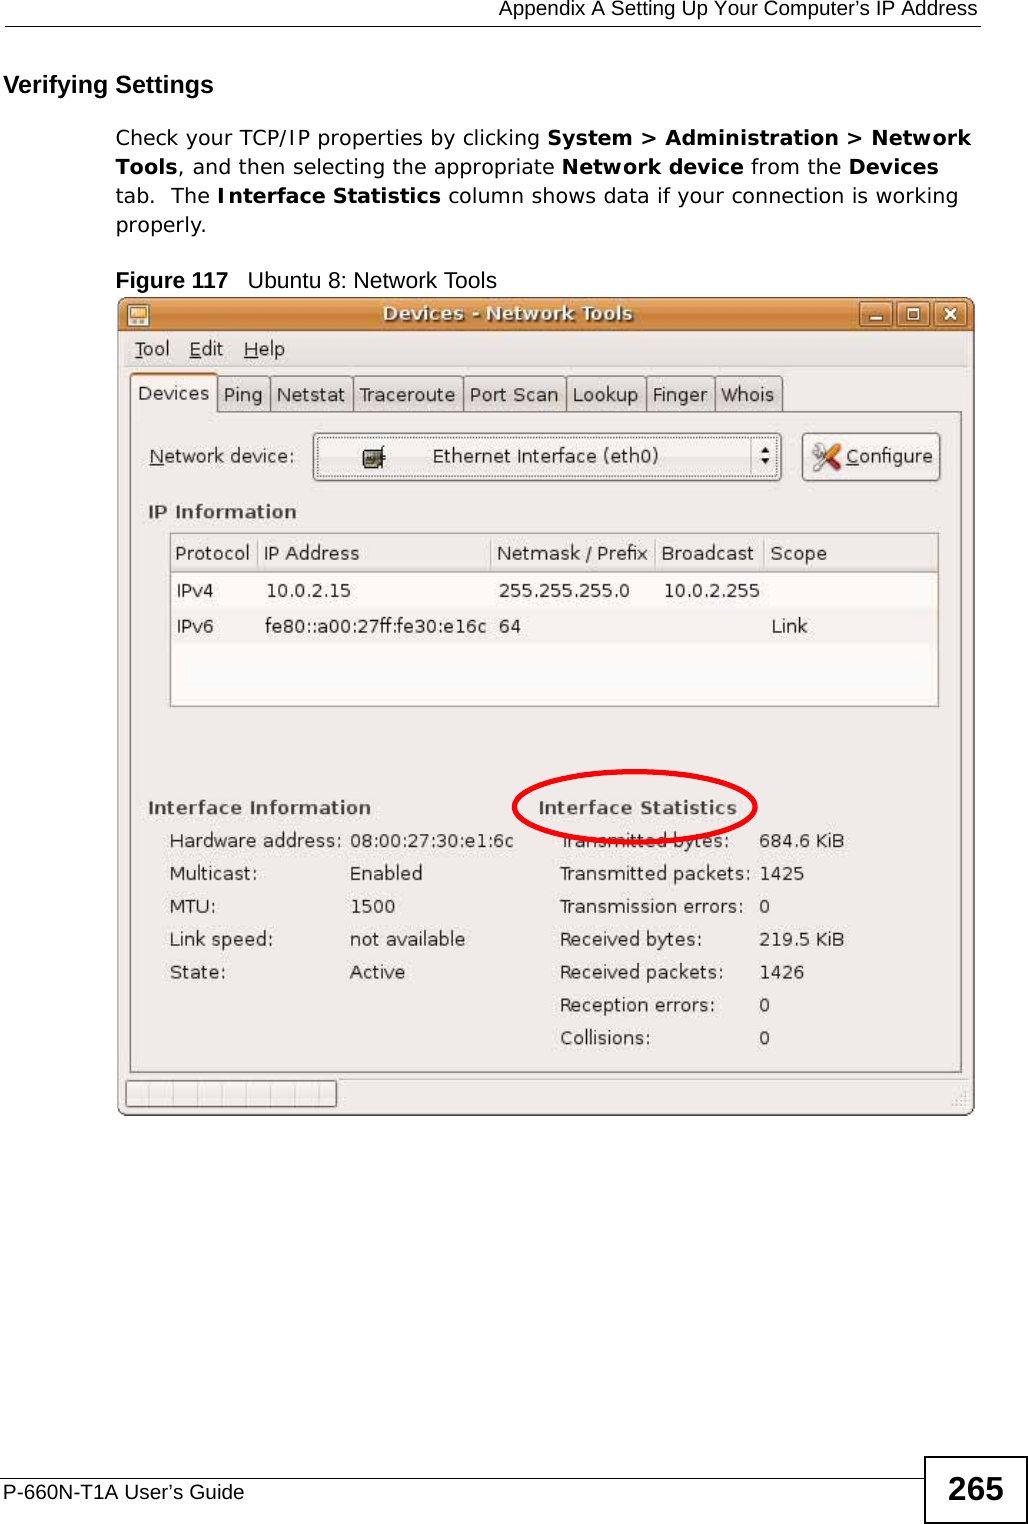  Appendix A Setting Up Your Computer’s IP AddressP-660N-T1A User’s Guide 265Verifying SettingsCheck your TCP/IP properties by clicking System &gt; Administration &gt; Network Tools, and then selecting the appropriate Network device from the Devices tab.  The Interface Statistics column shows data if your connection is working properly.Figure 117   Ubuntu 8: Network Tools